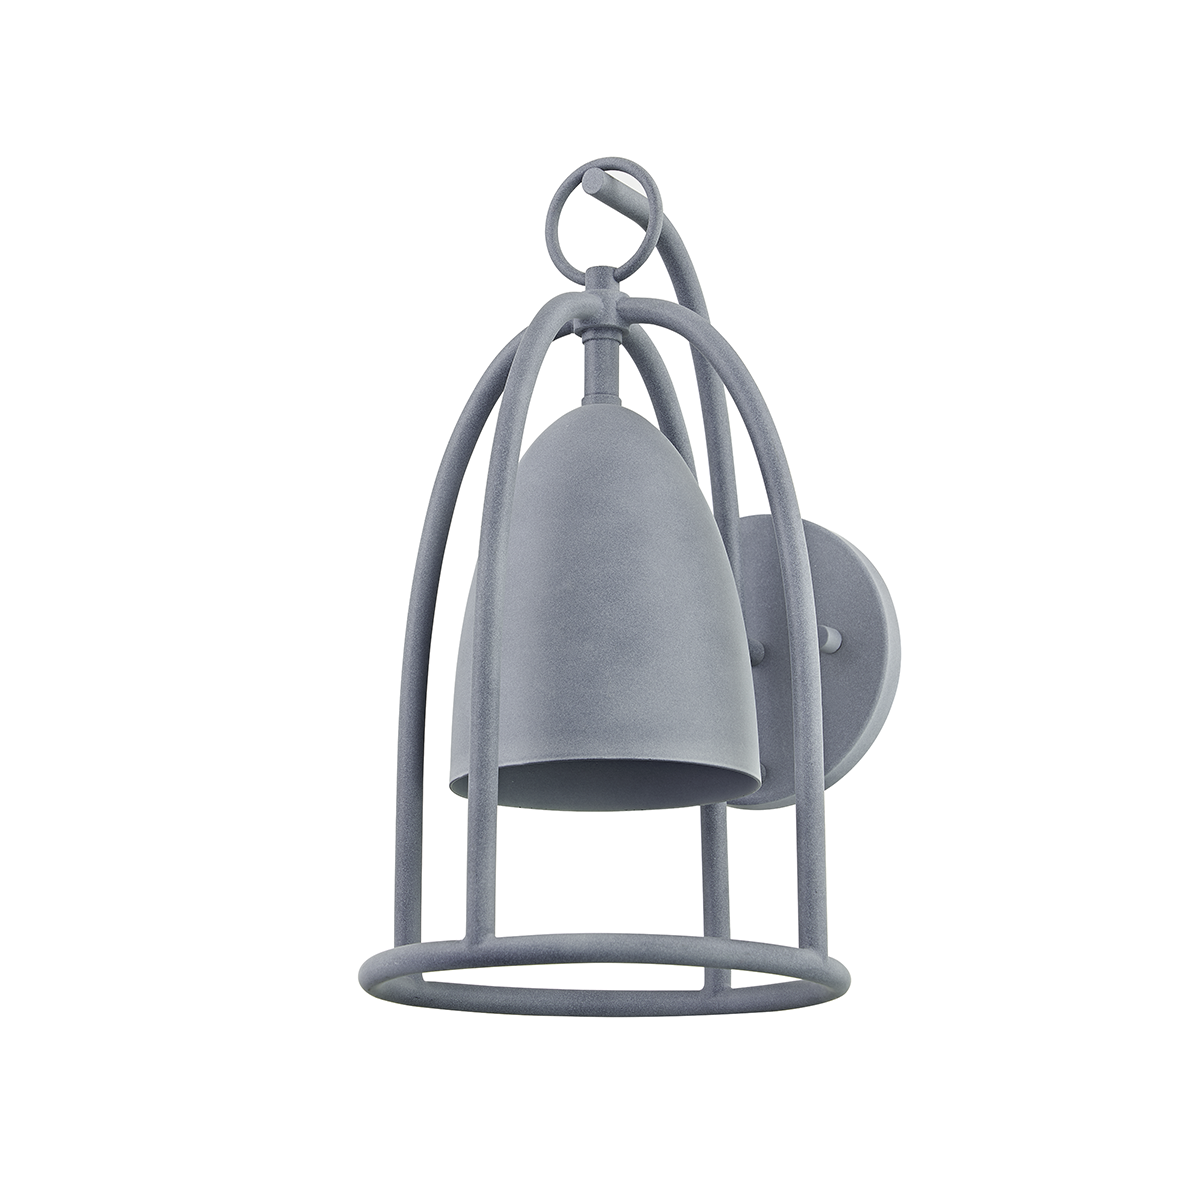 Troy WISTERIA 1 LIGHT EXTERIOR WALL SCONCE B1101 Outdoor l Wall Troy Lighting WEATHERED ZINC  